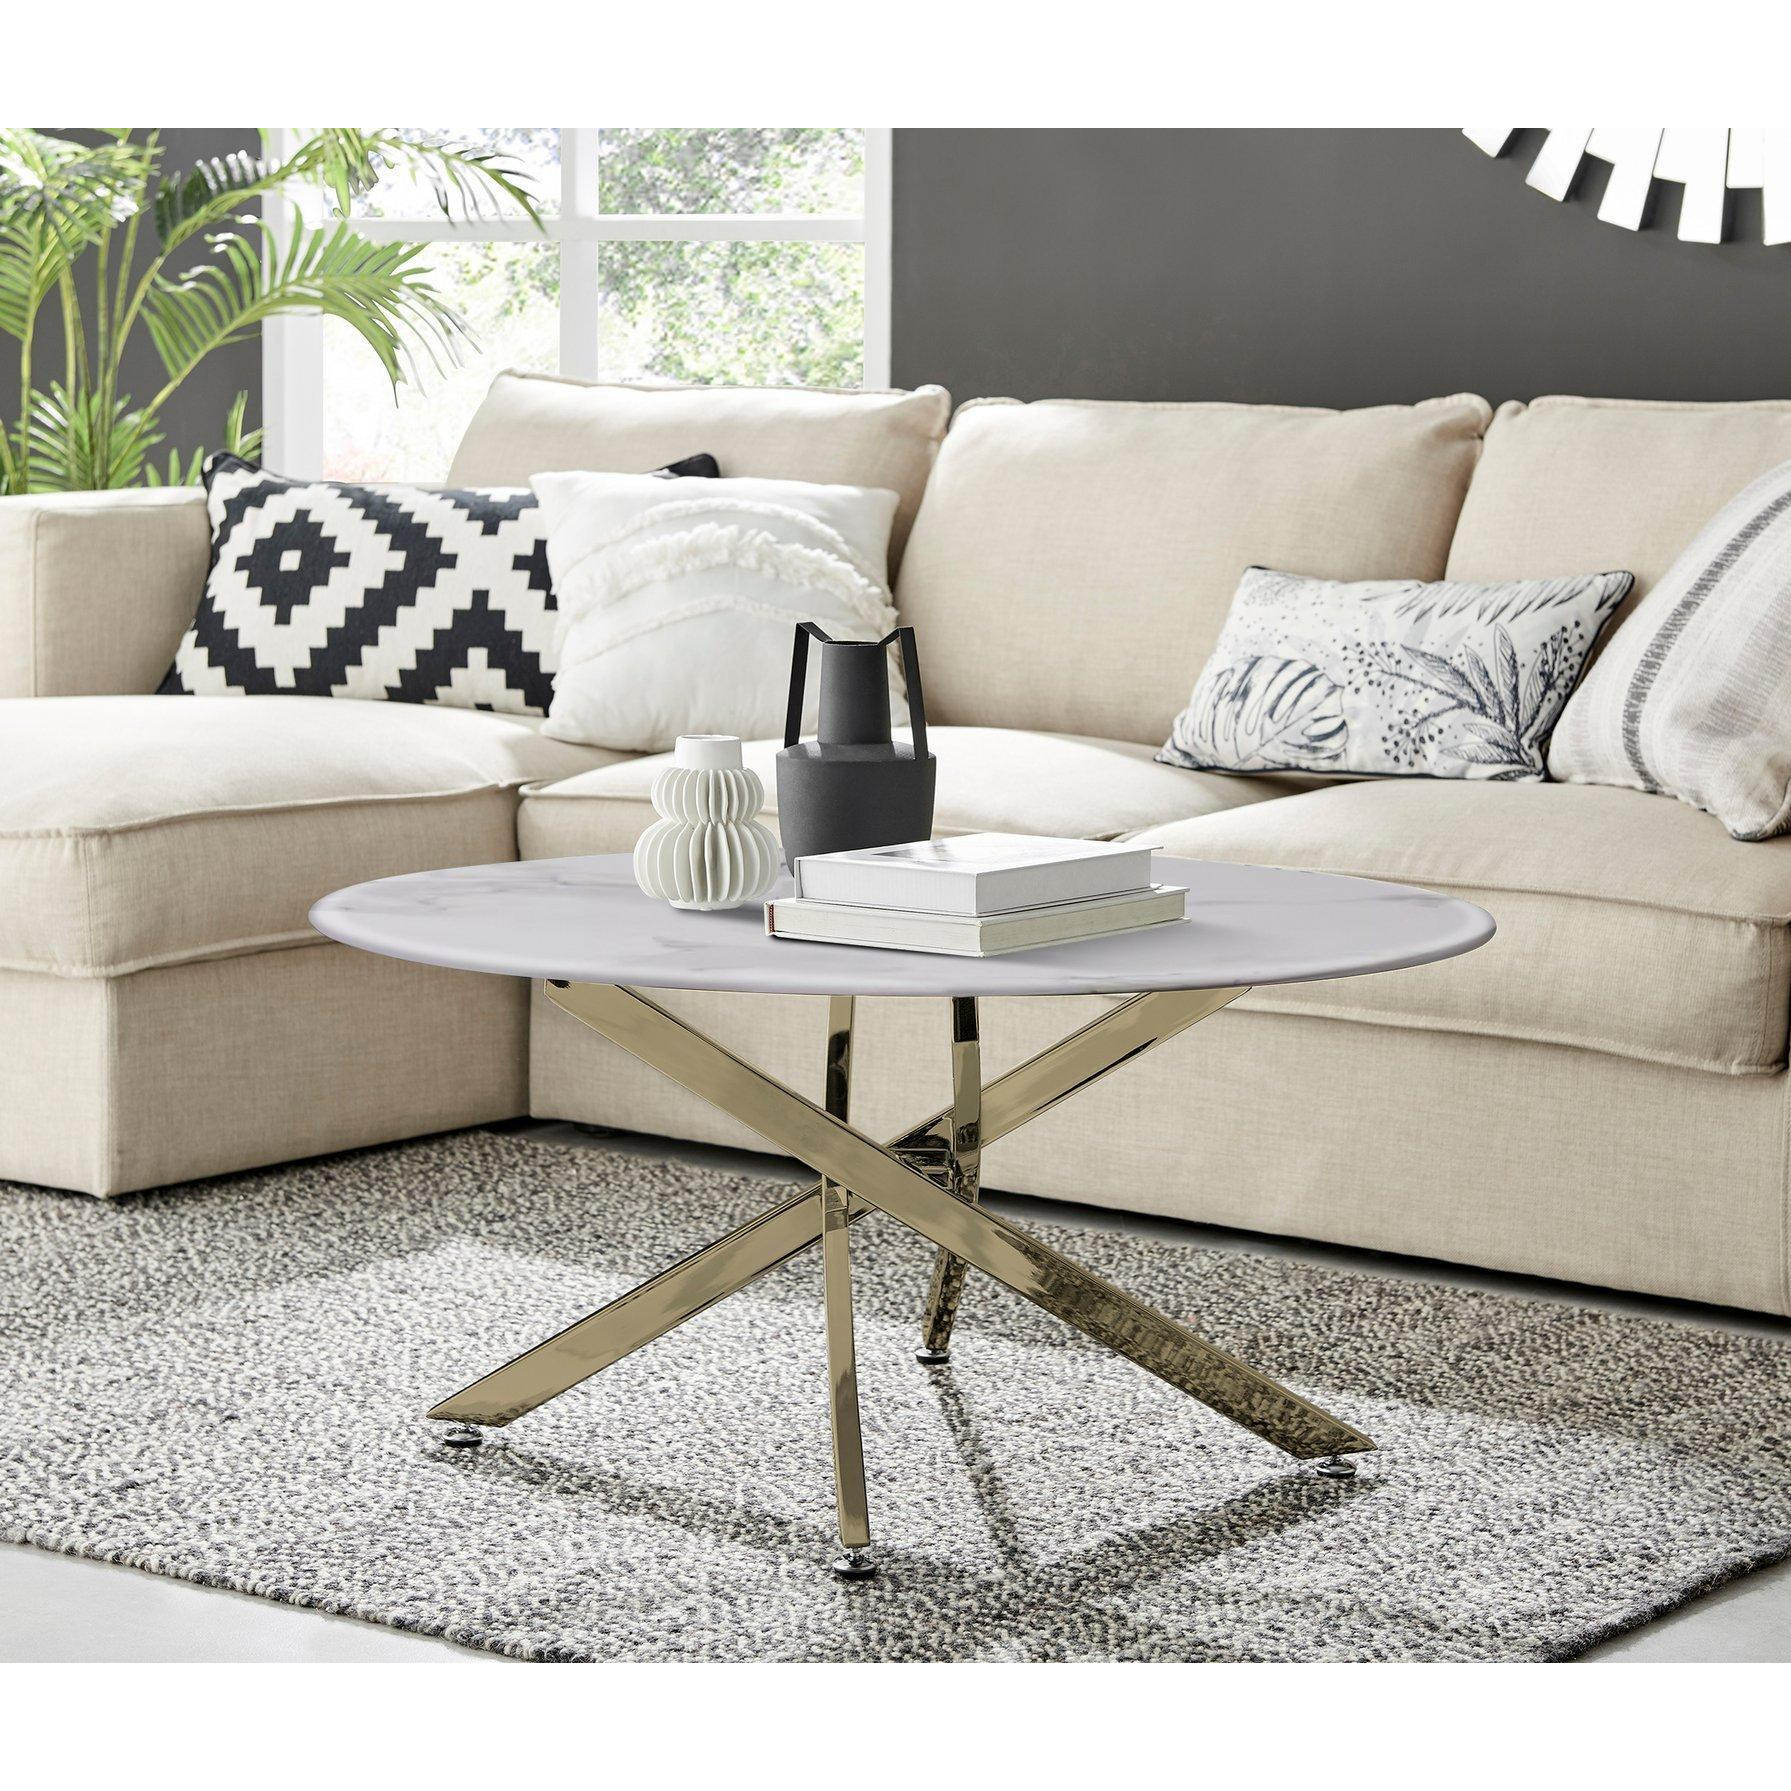 Novara Round Marble Effect Glass Top Coffee Table With Gold Metal Starburst Legs - image 1